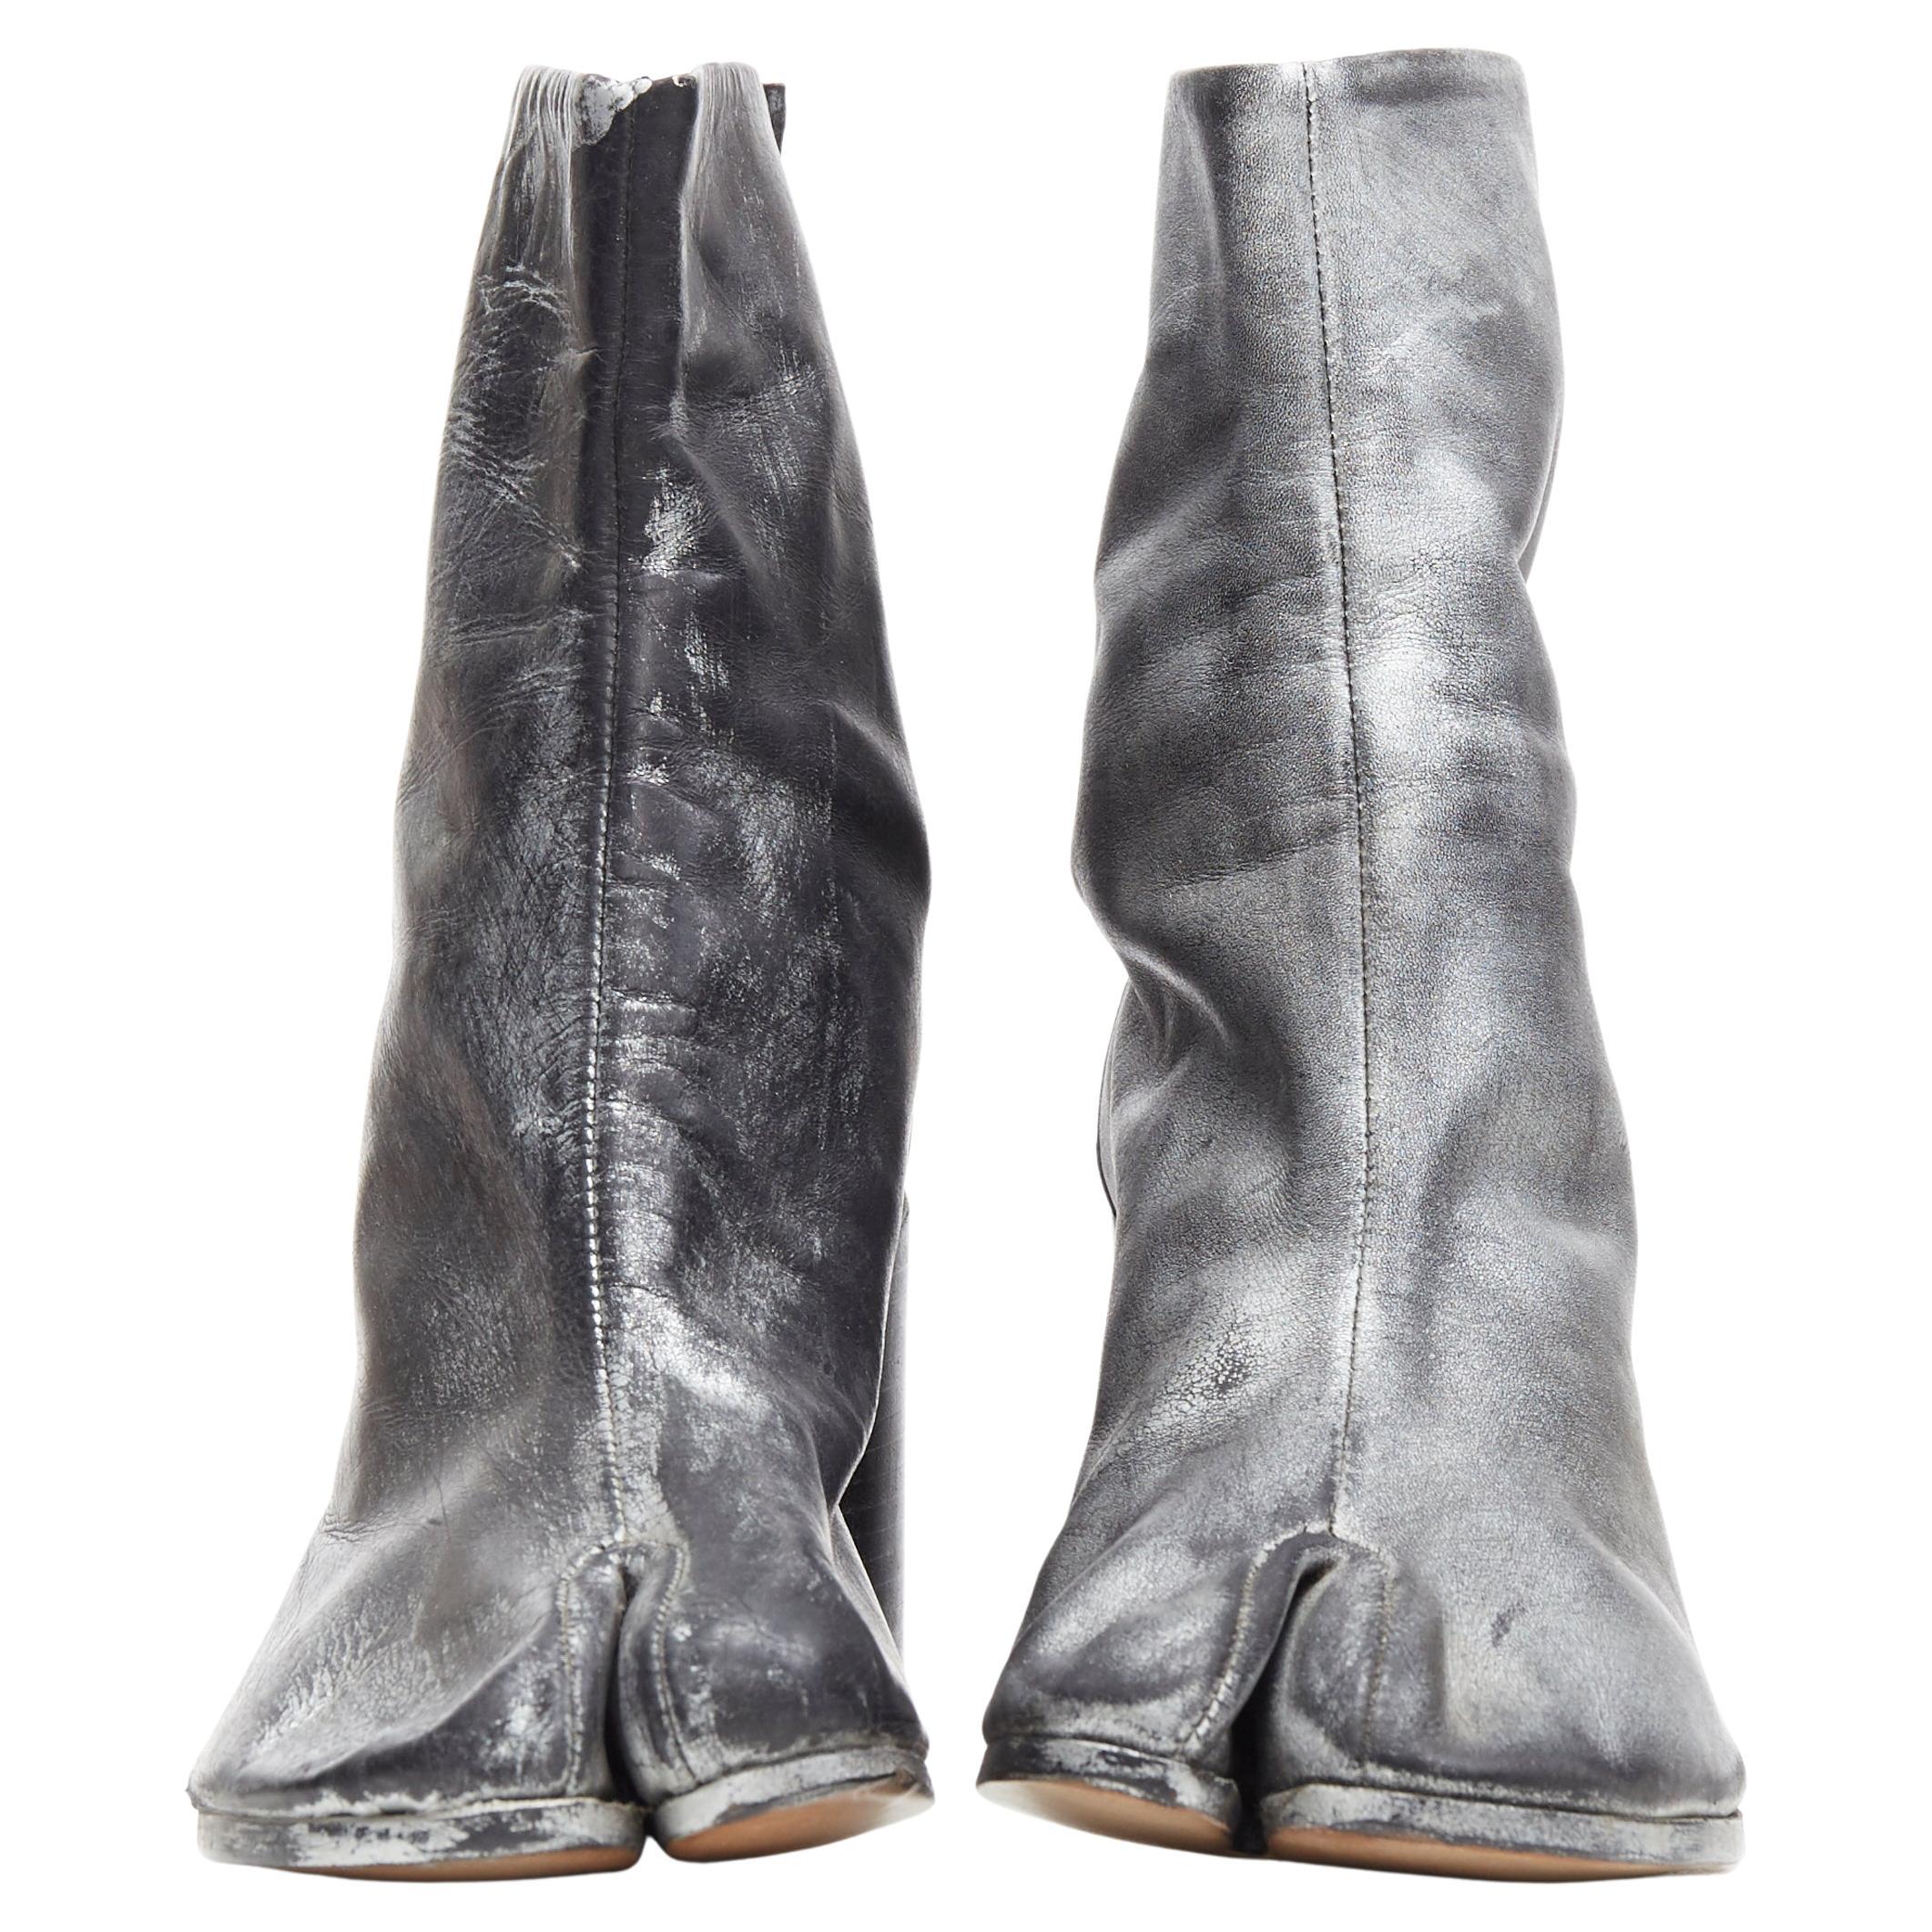 Tabi Boots - 3 For Sale on 1stDibs